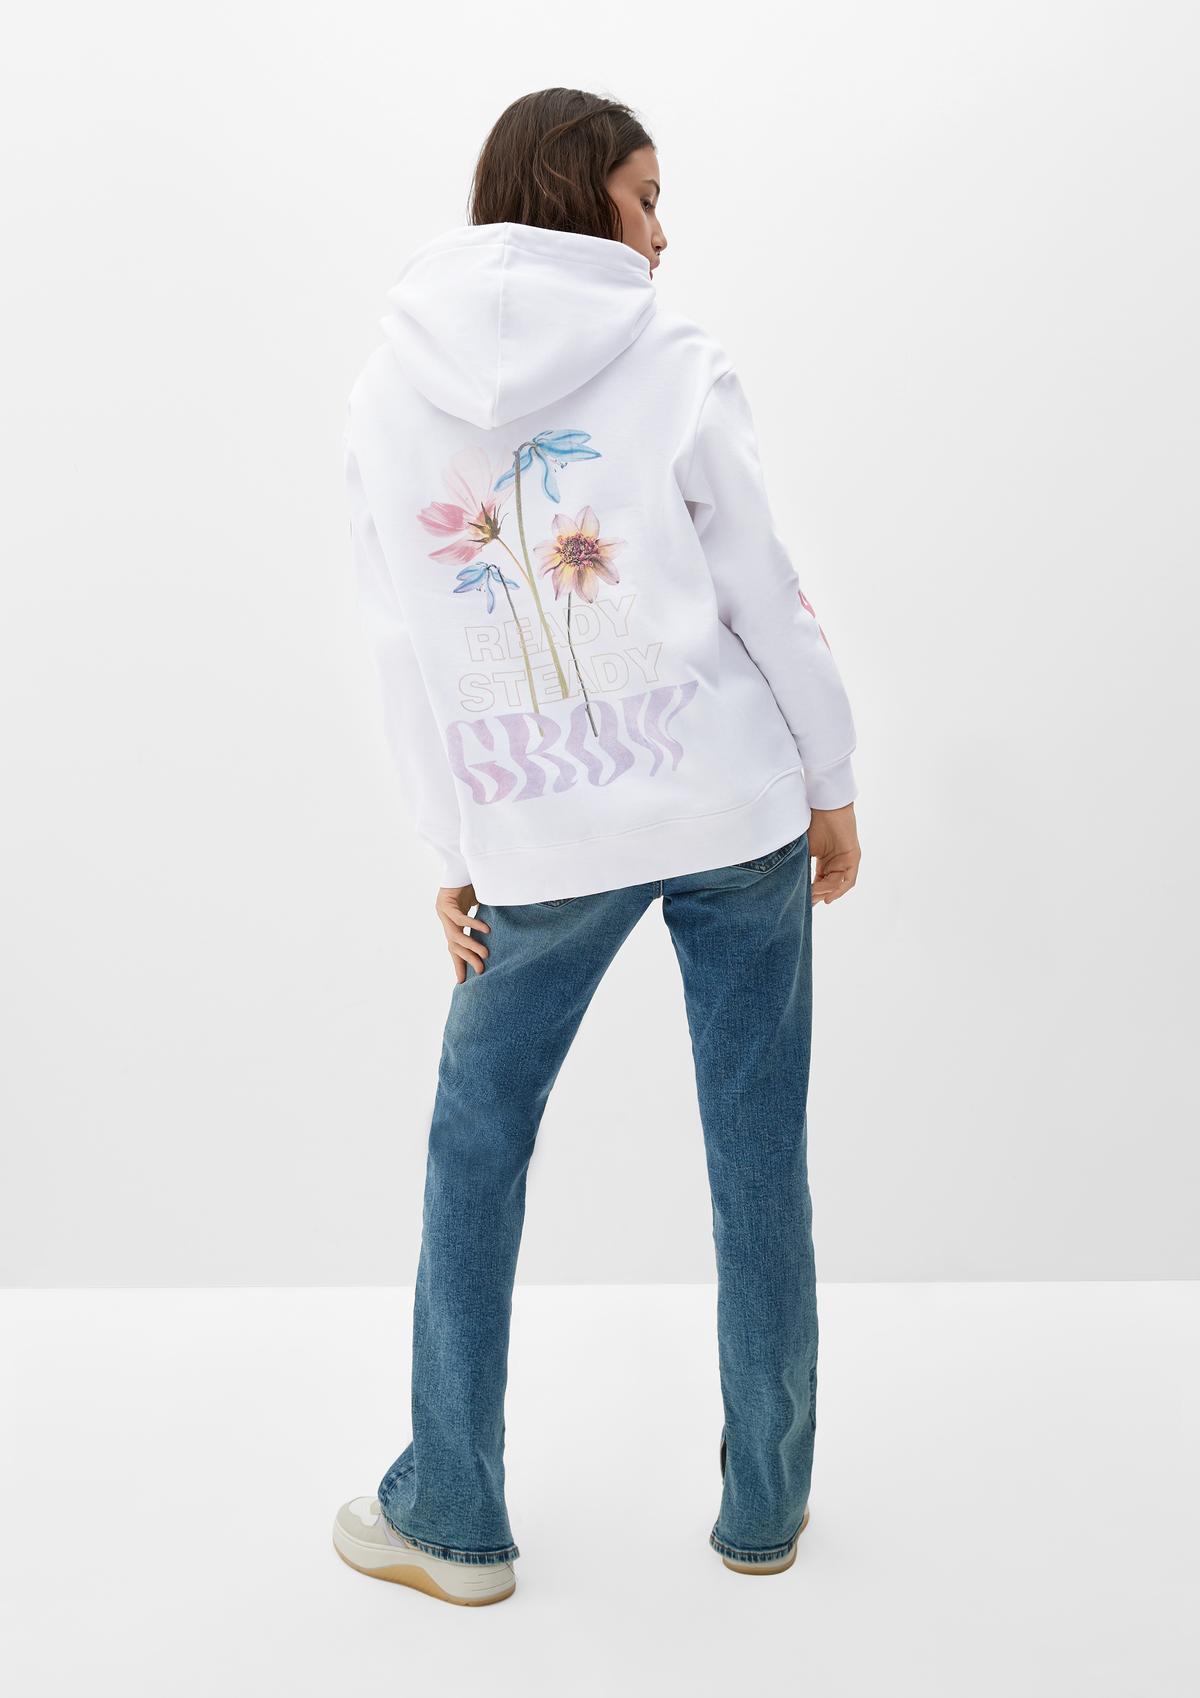 Hooded sweatshirt with - print white back a